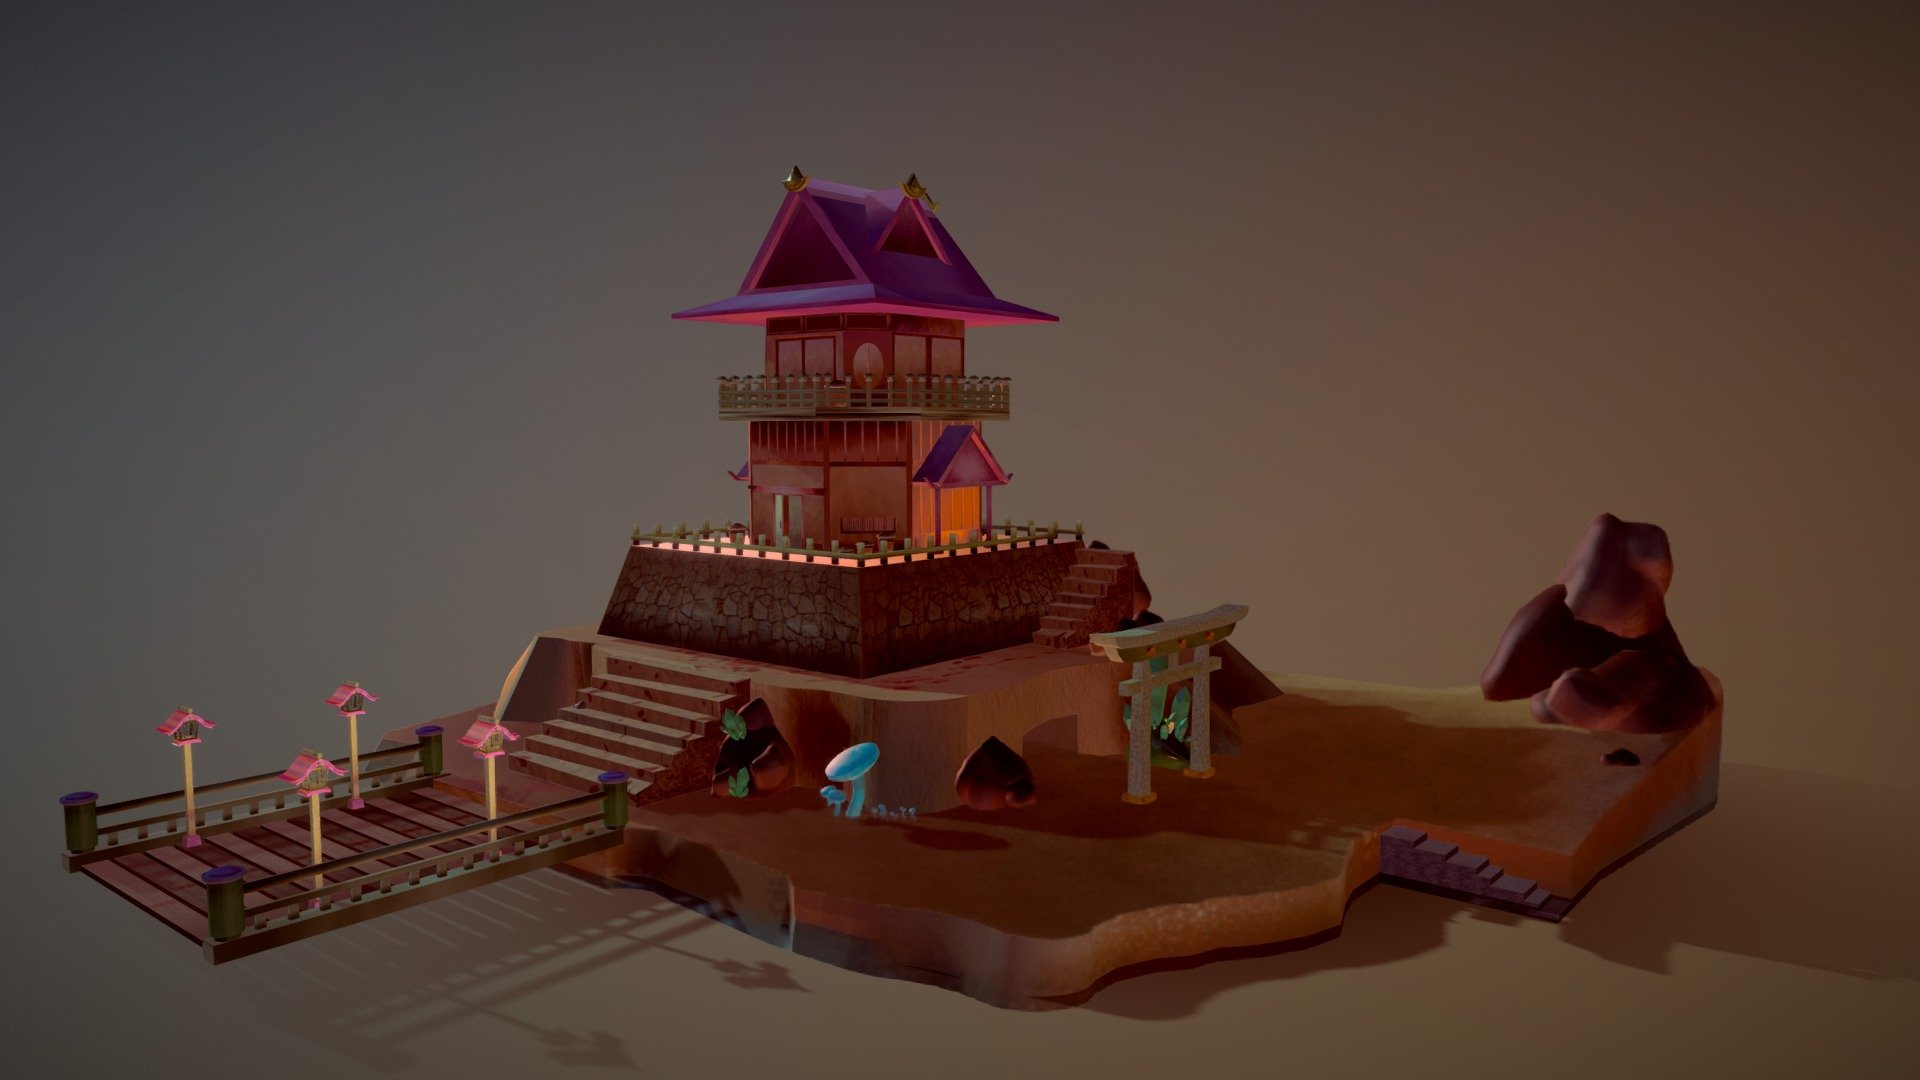 During the Tokyo Edo period, a mysterious abandonned Outpost is found by a teenager who run away from his house. In a century tainted by blood and where samurais ruled over the lore, this gracious monument as one could call it stand majestuously on an island surrounded by mysterious crystals and mushrooms 3d model